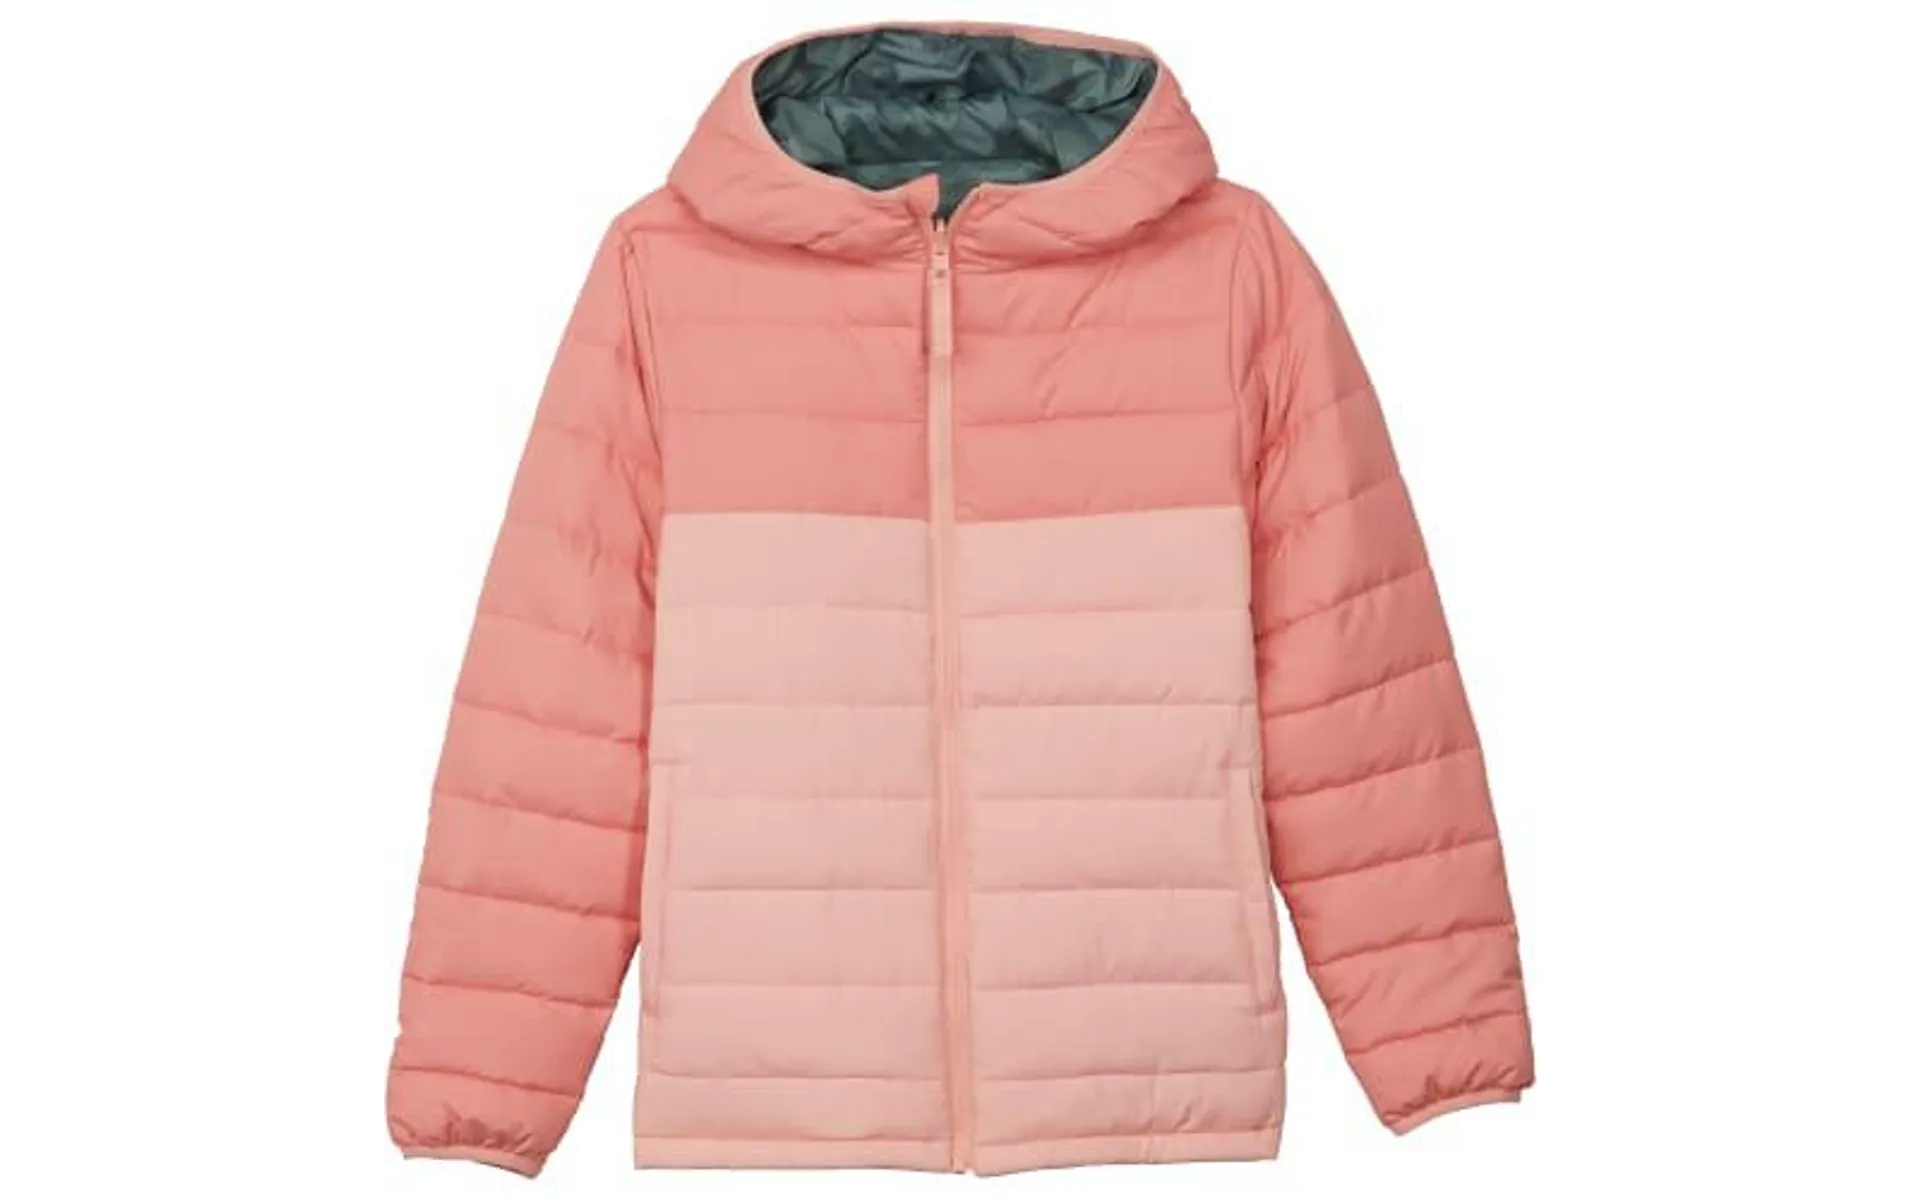 Outdoor Kids Reversible Down Alternative Jacket for Toddlers or Girls